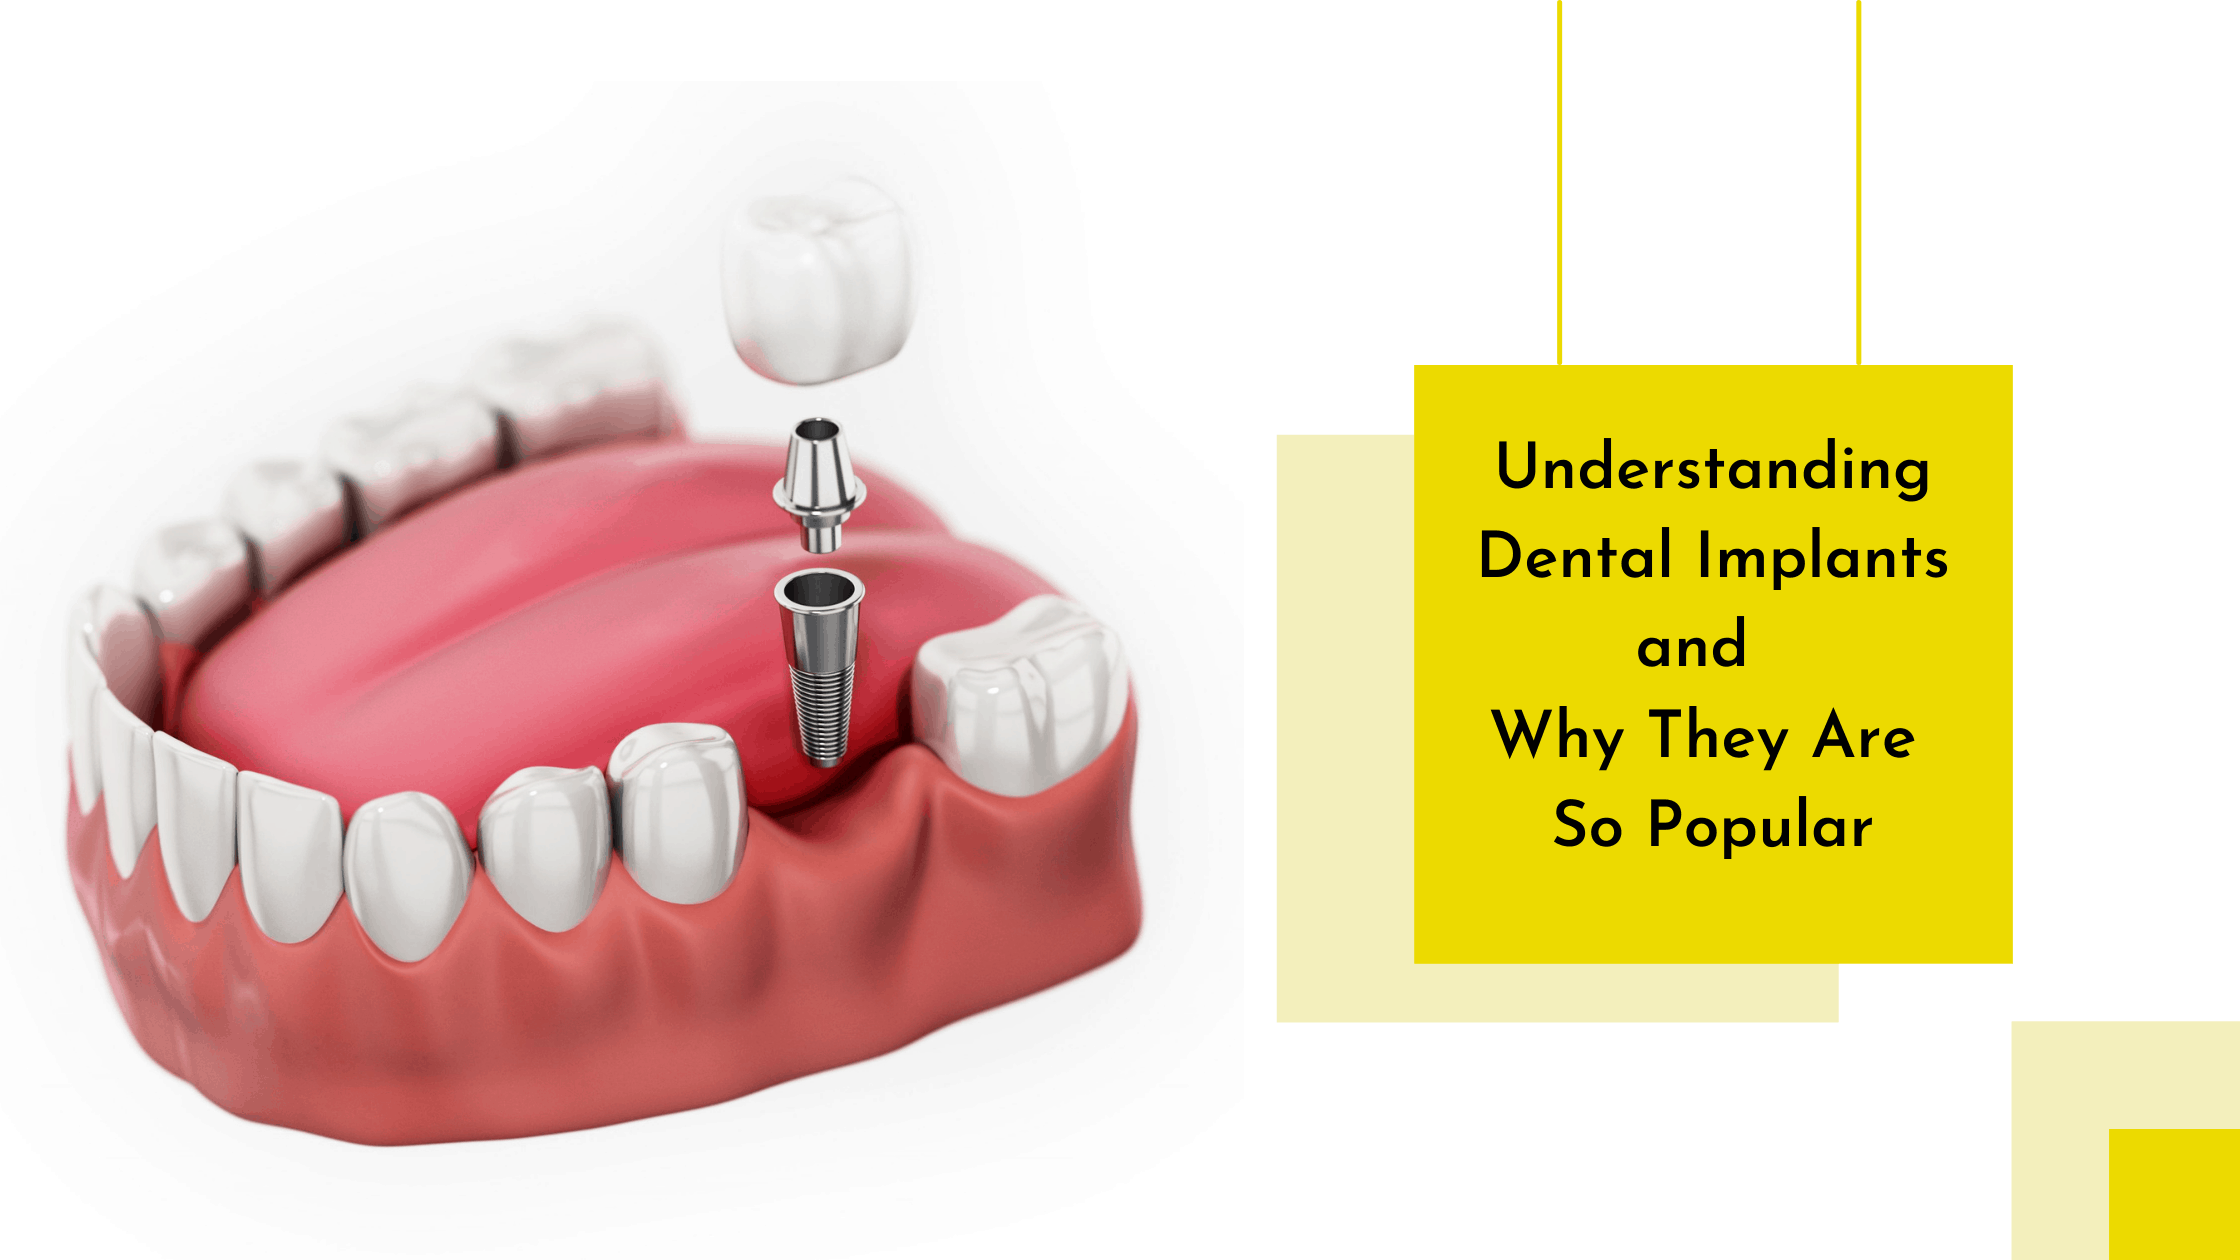 Understanding Dental Implants and Why They Are So Popular